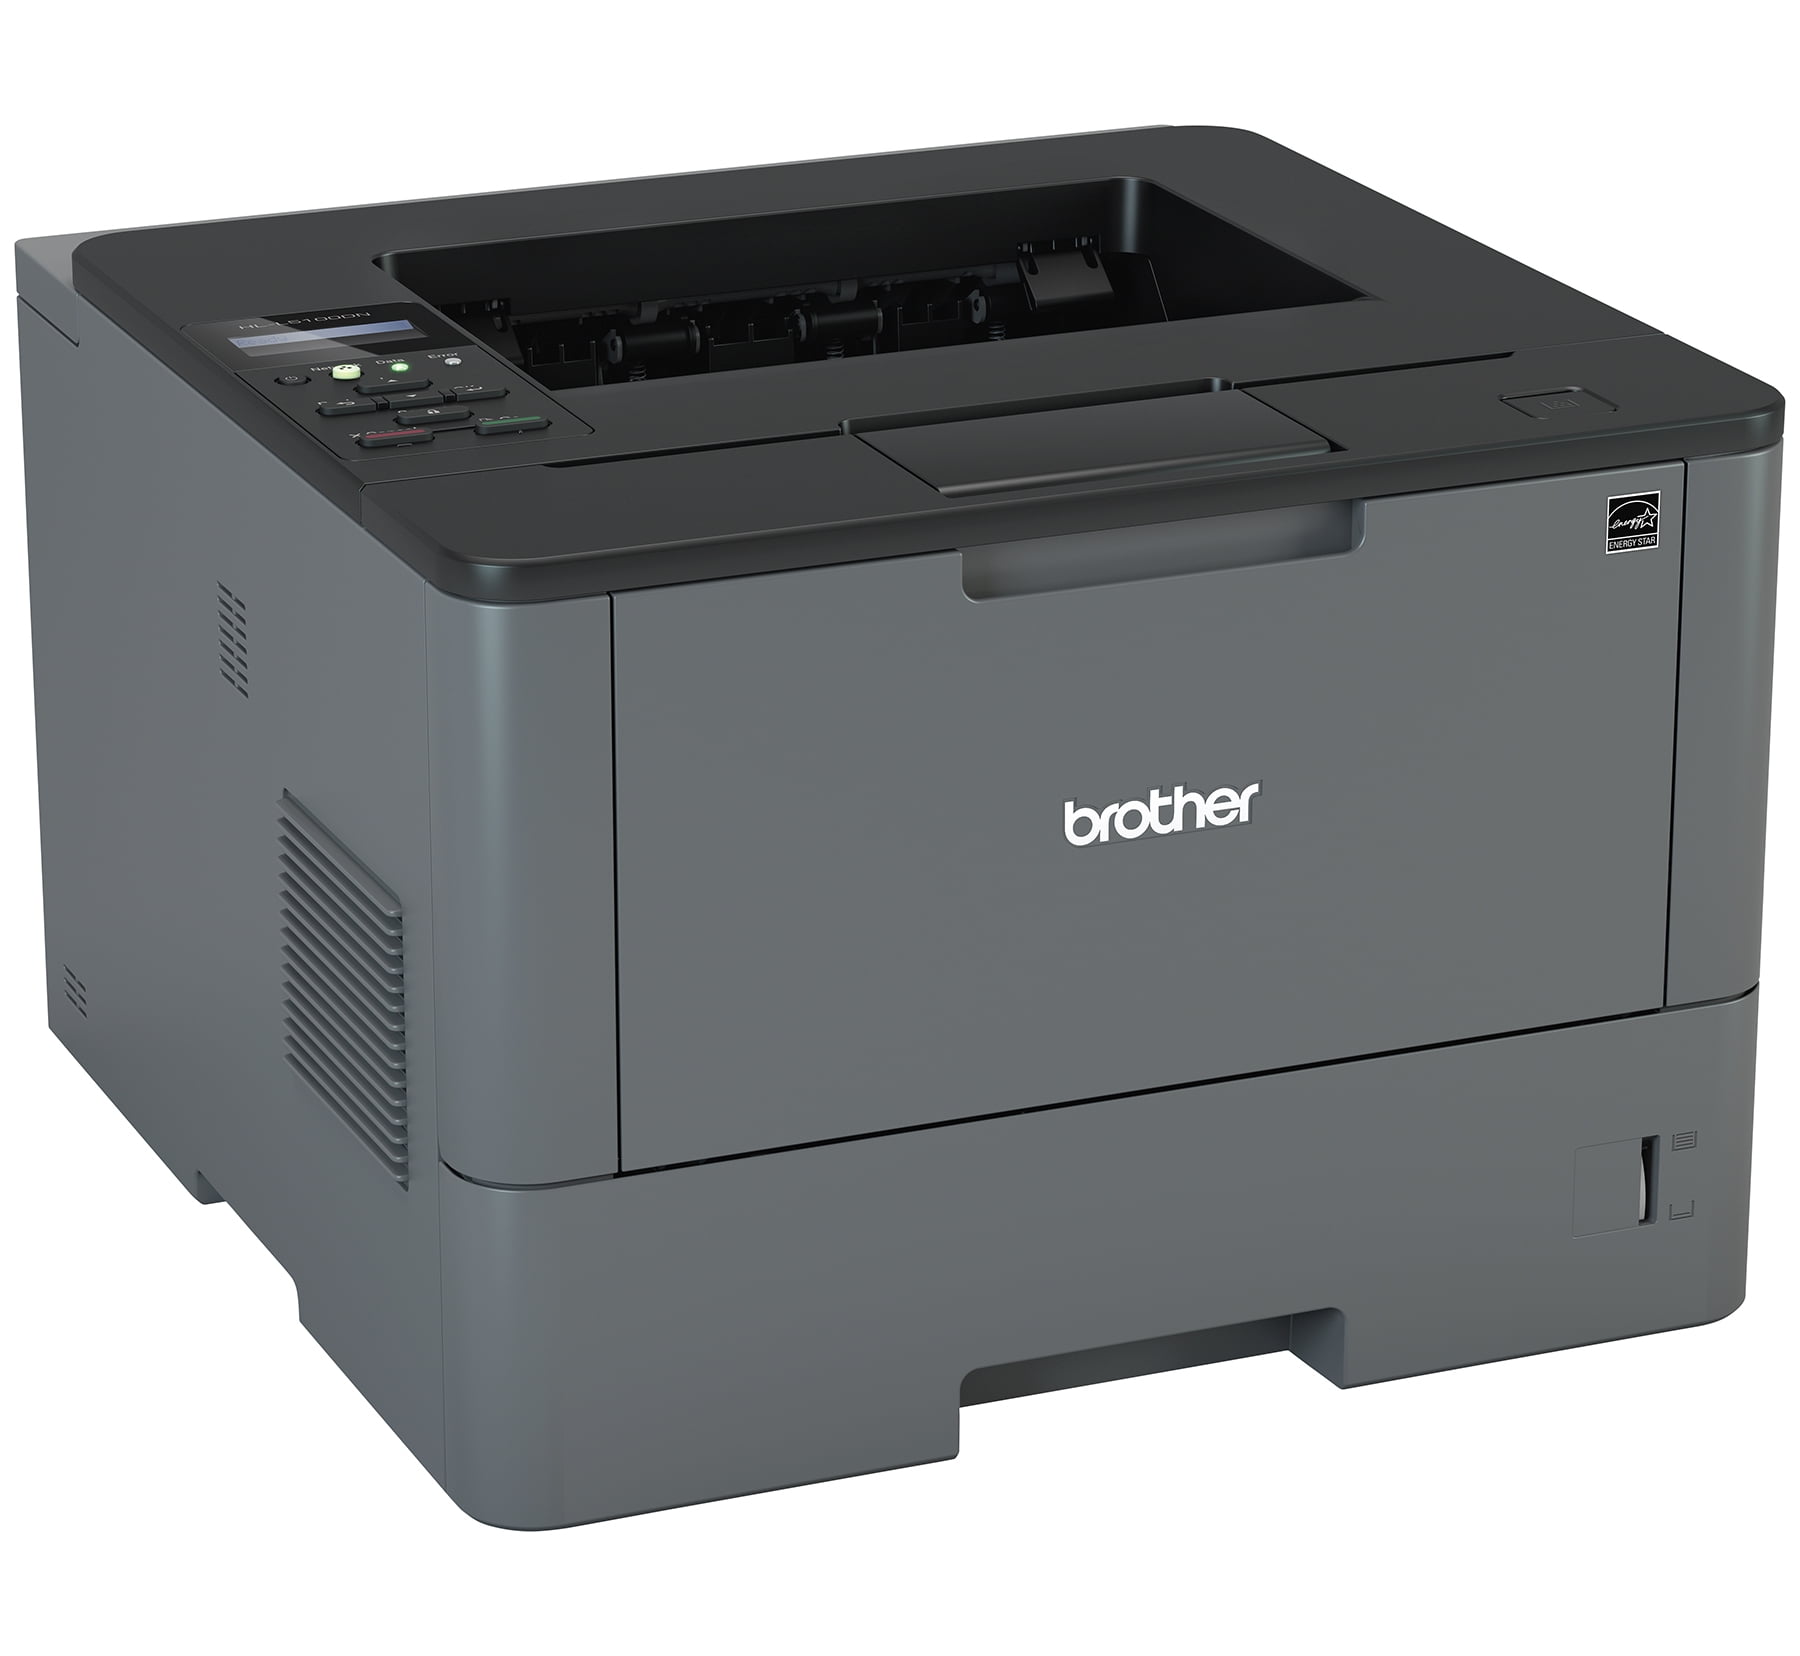 Brother Monochrome Laser Printer, HL-L5100DN, Duplex Two-Sided Printing, Network Interface, Mobile Printing - Walmart.com